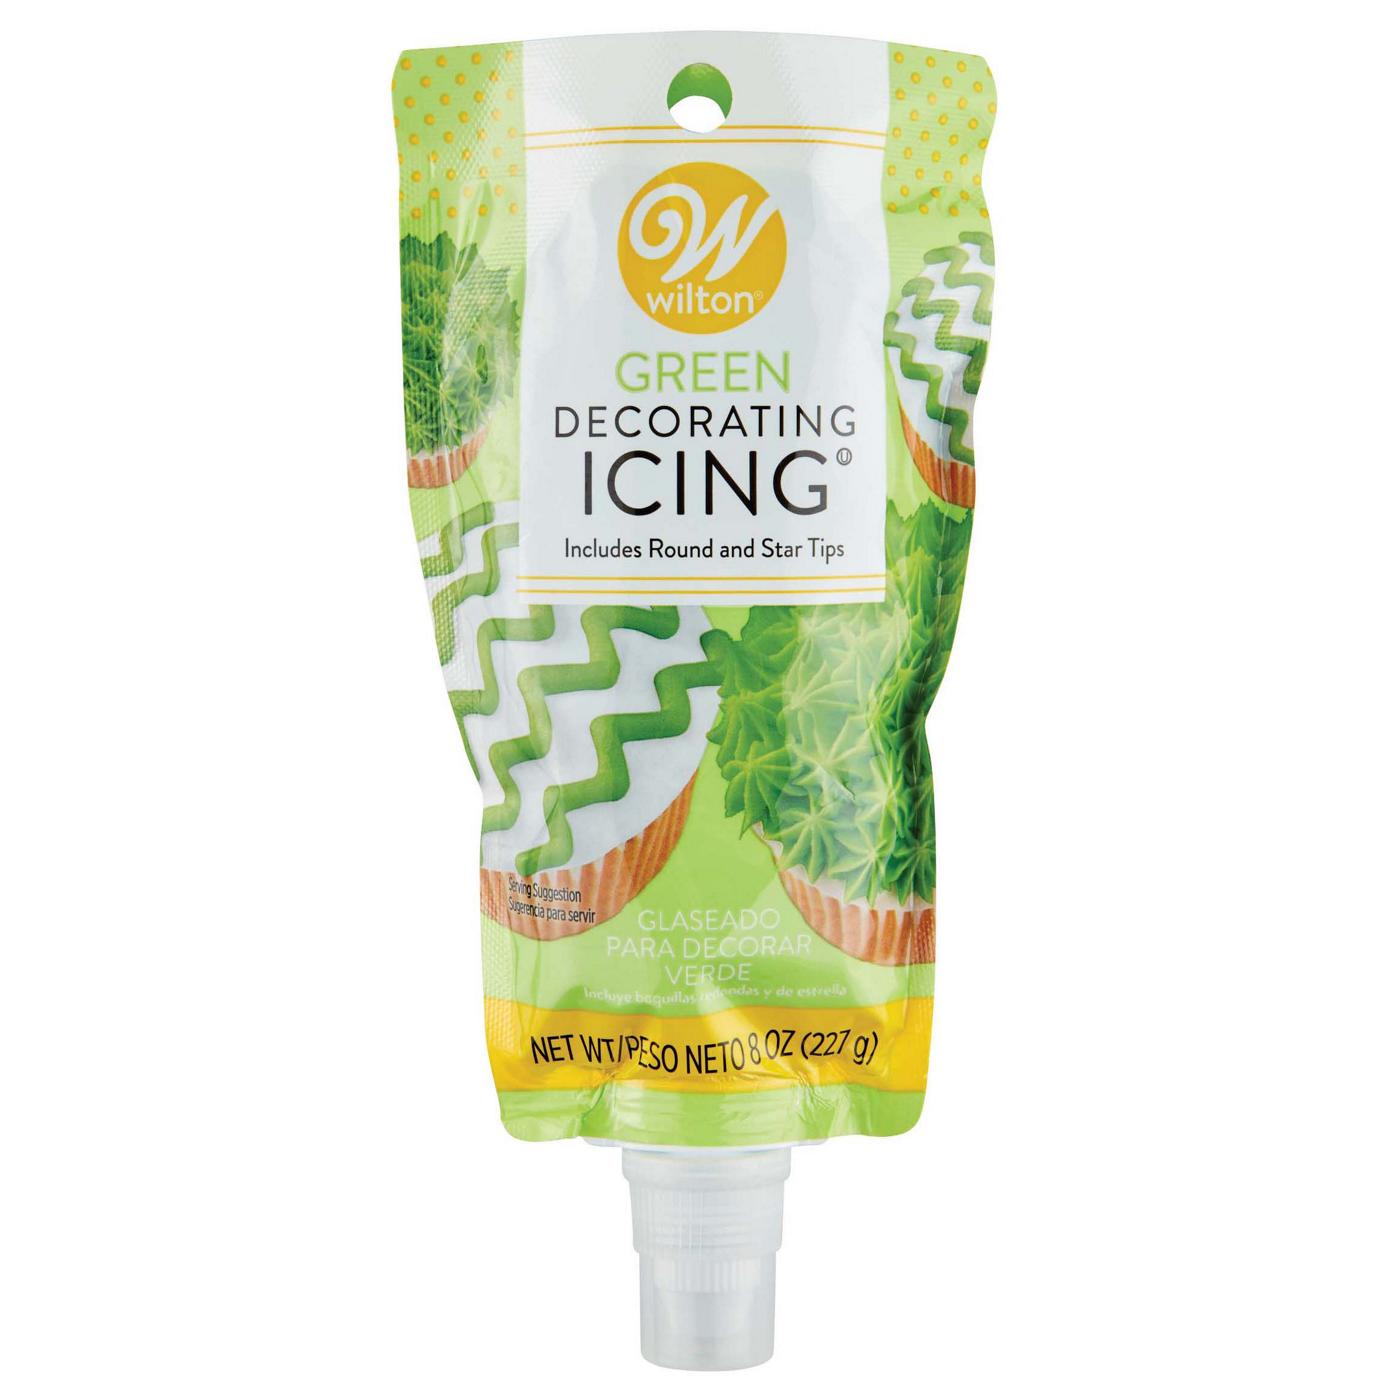 Wilton Decorating Icing Pouch with Tips - Green; image 1 of 4